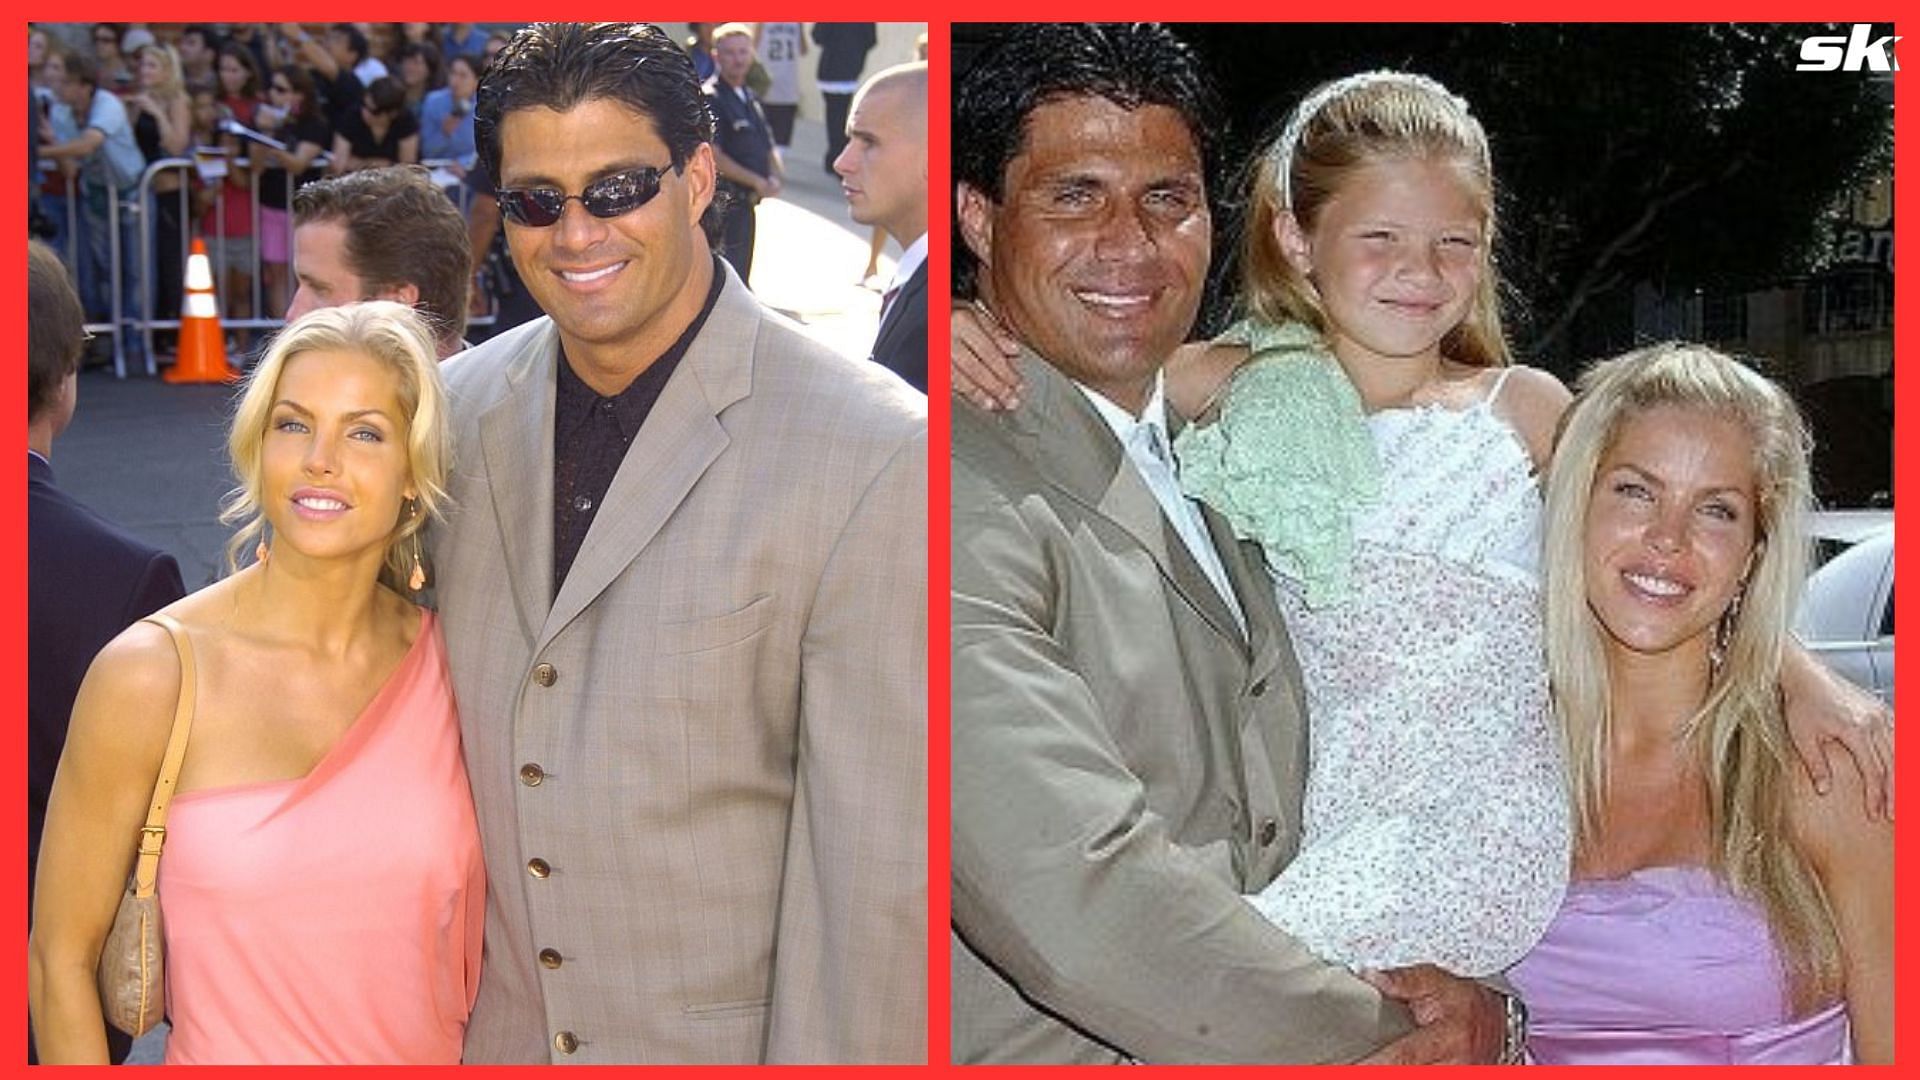 Jose Canseco: When Jose Canseco's ex-wife Jessica's accidental